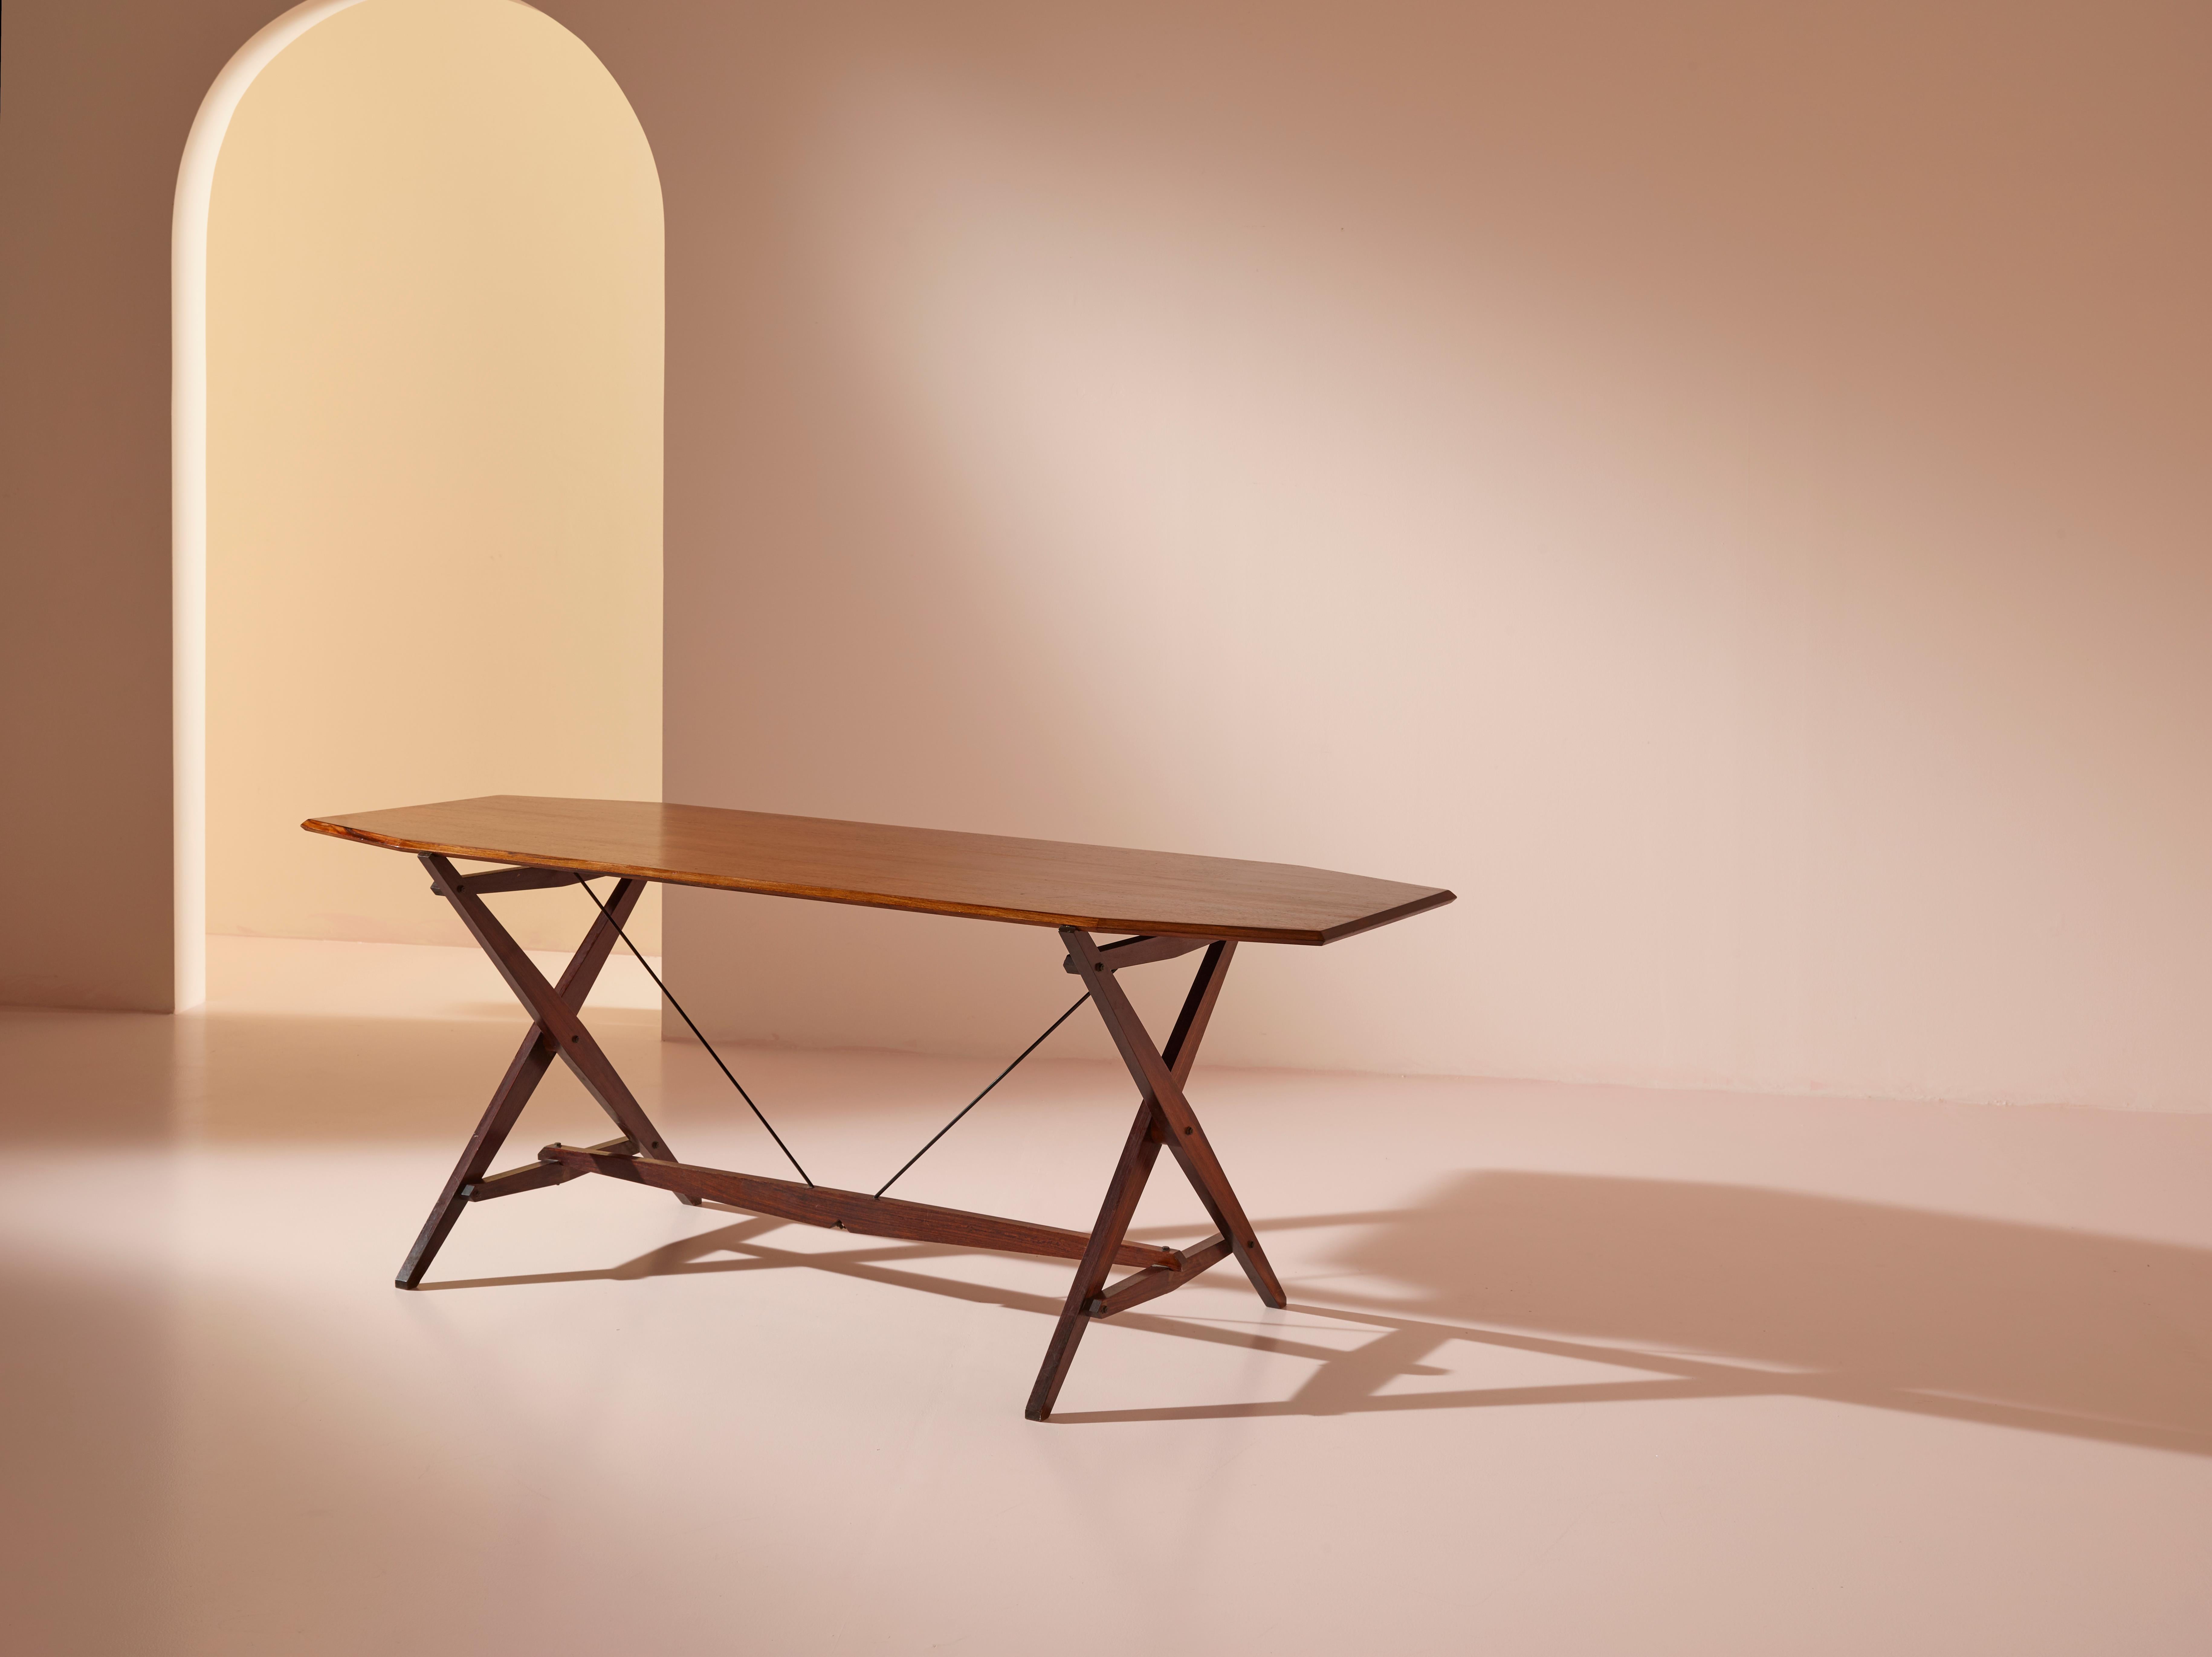 A dining table or desk Model TL2 by Franco Albini, better known as 